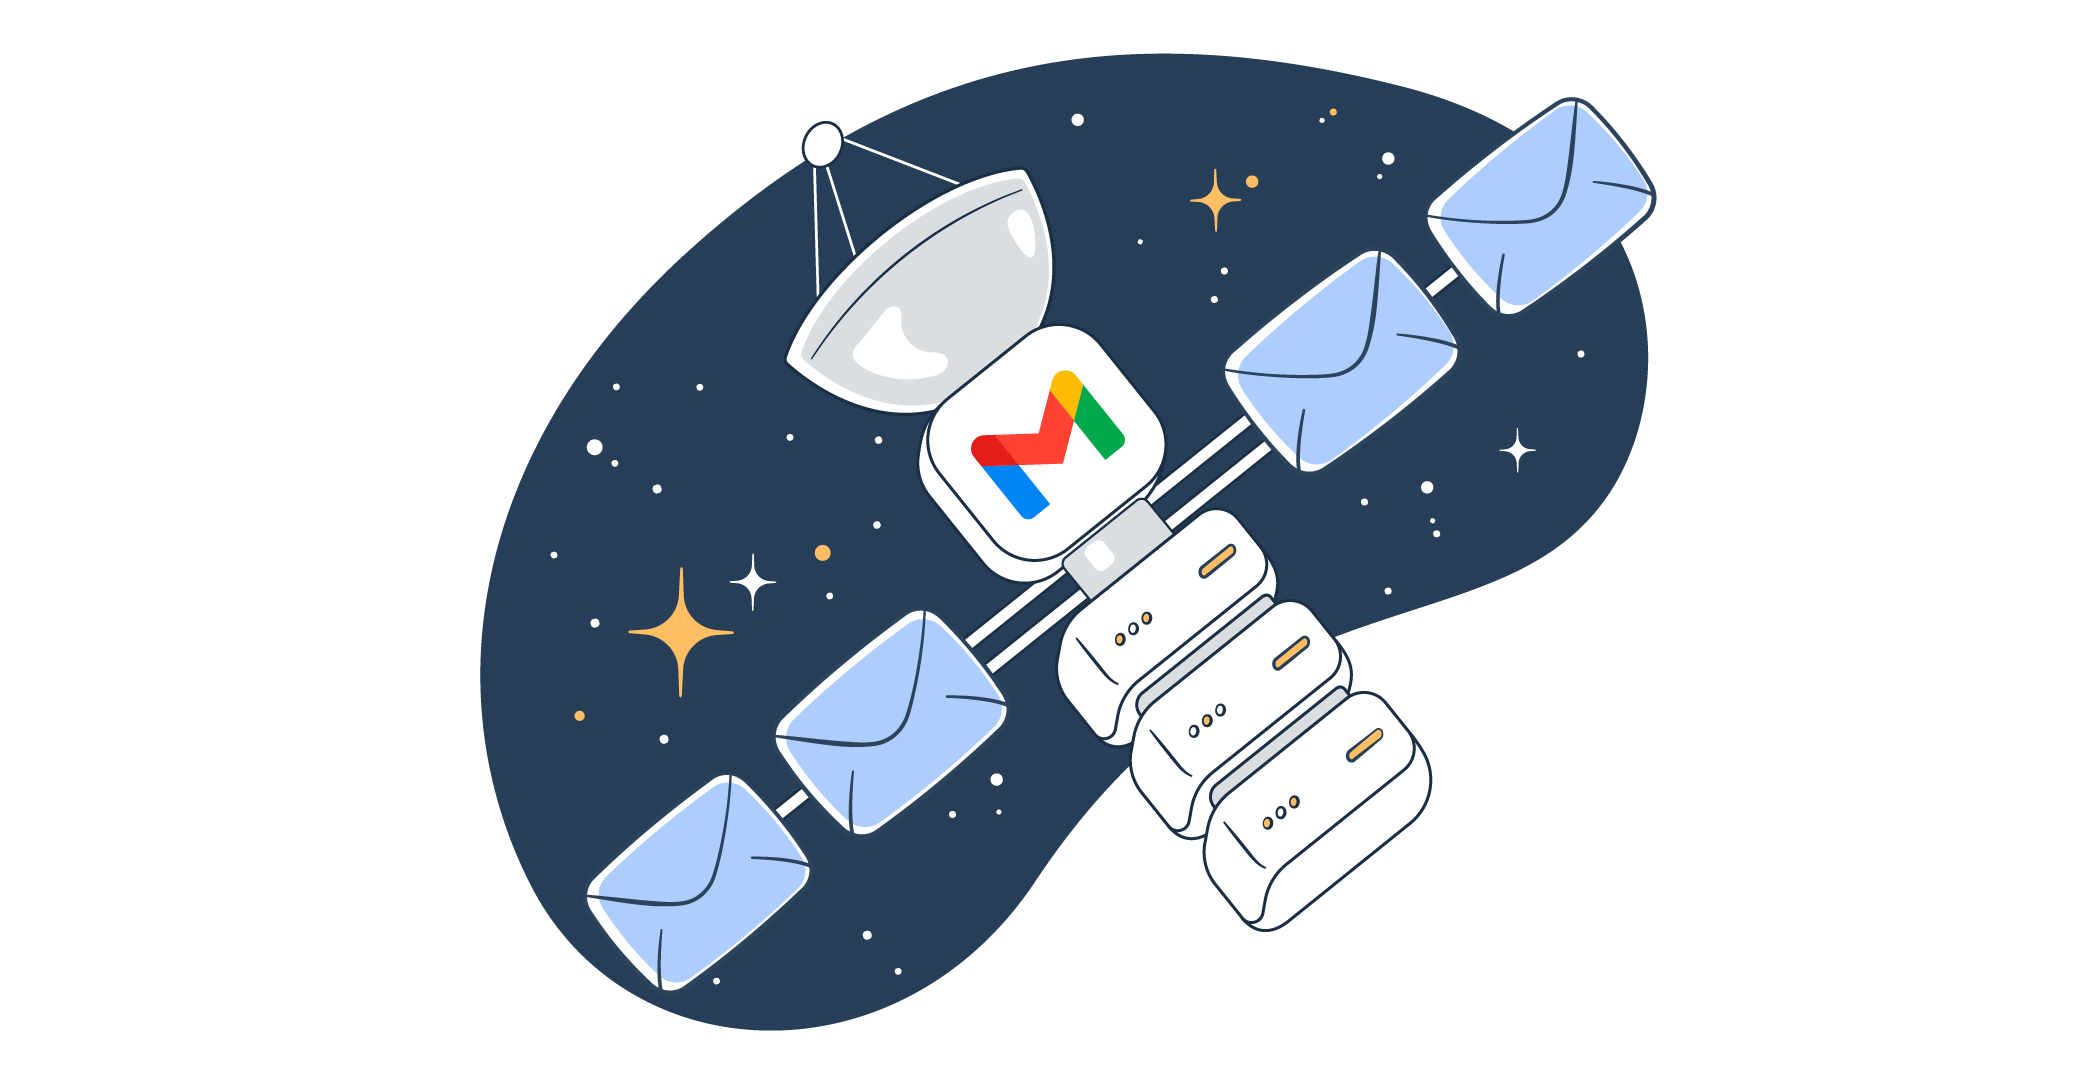 This image is a symbolic graphic representation of Gmail SMTP for the article that covers the topic in detail.